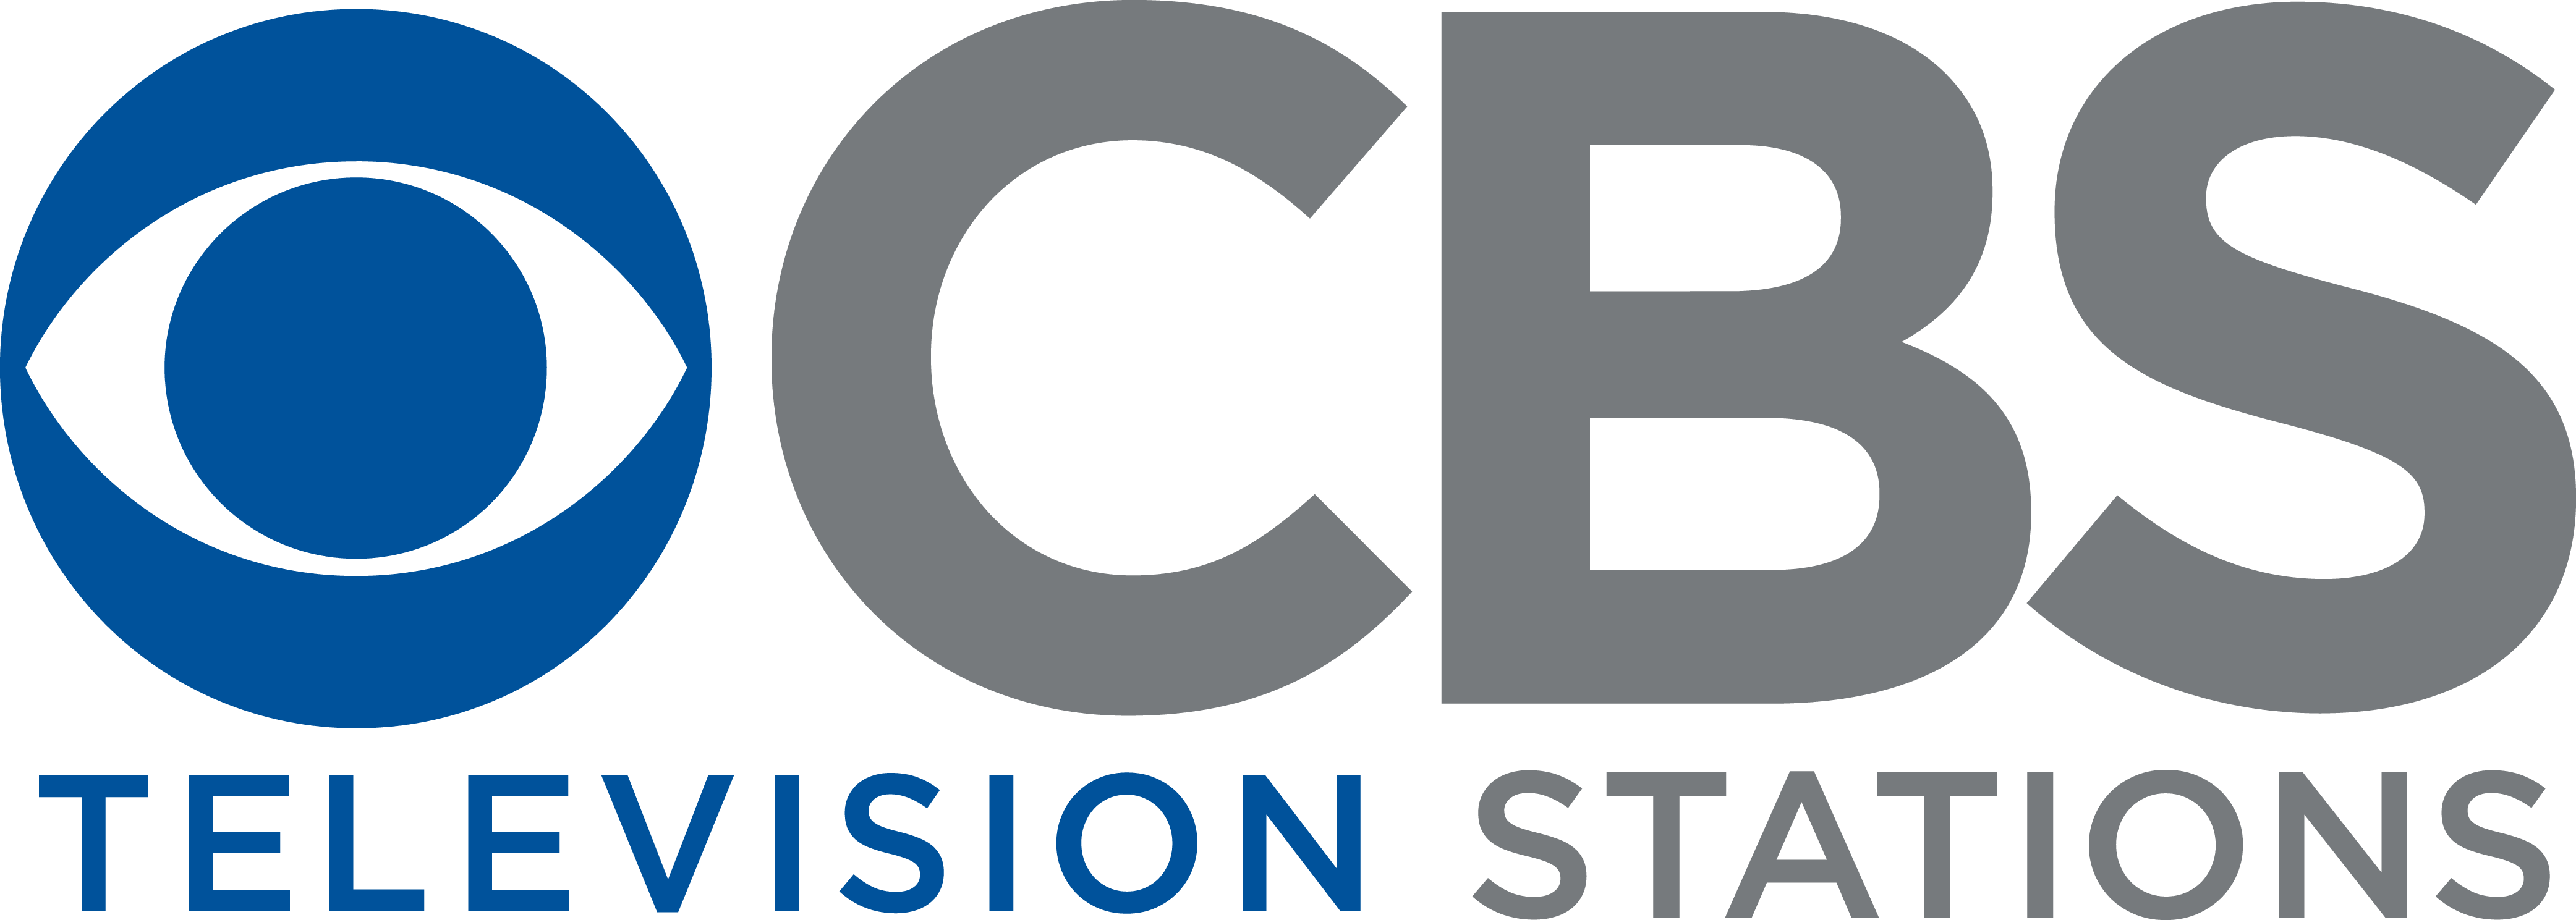 CBS Television Stations